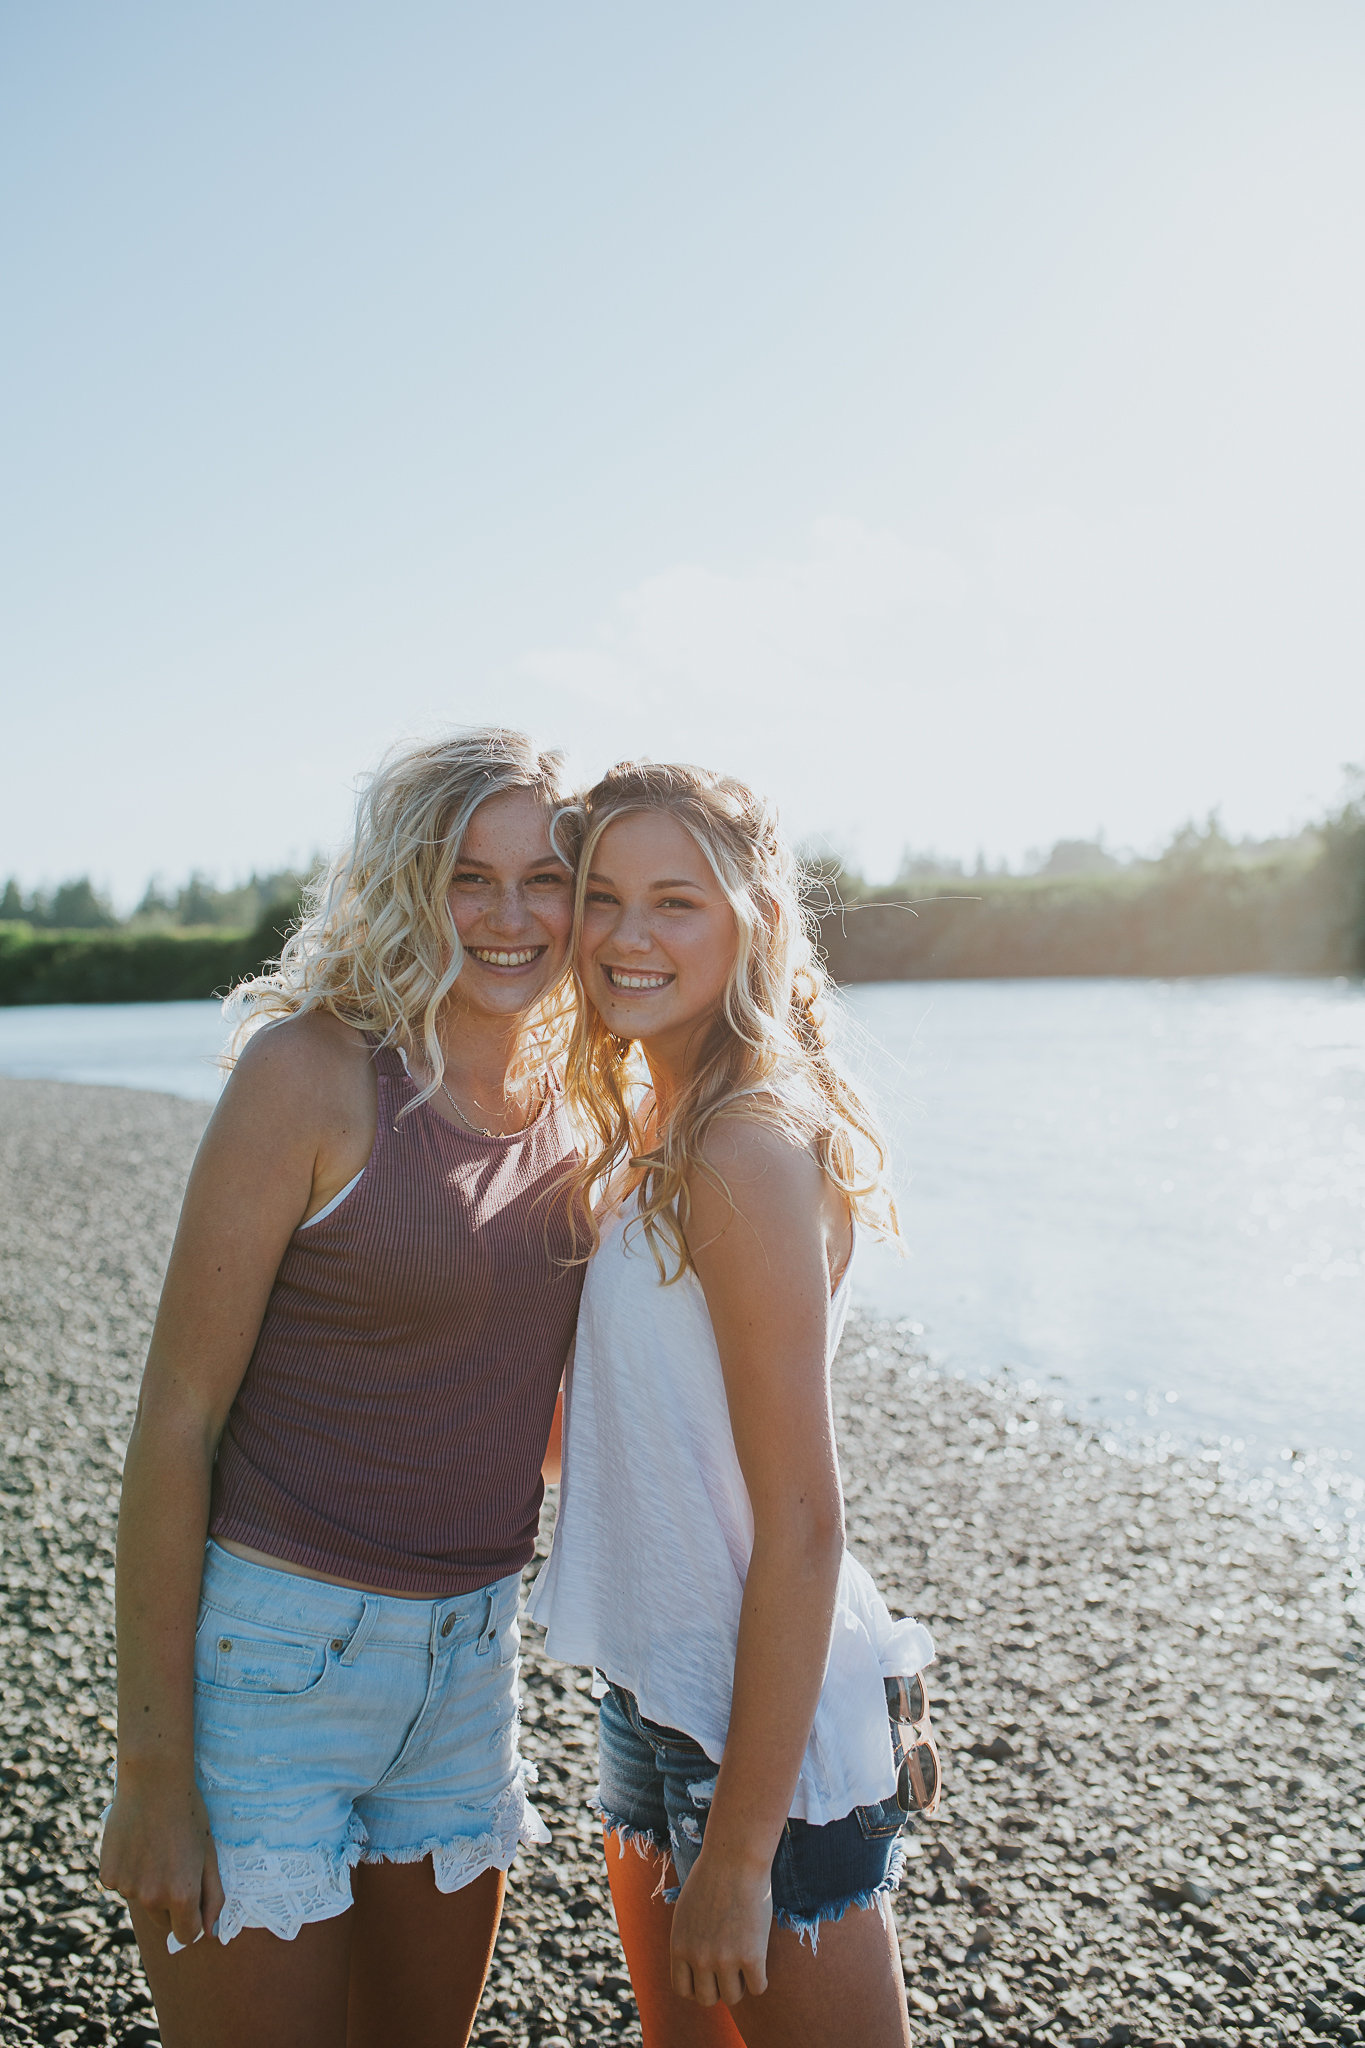 Country sisters growing up on a farm in the PNW.